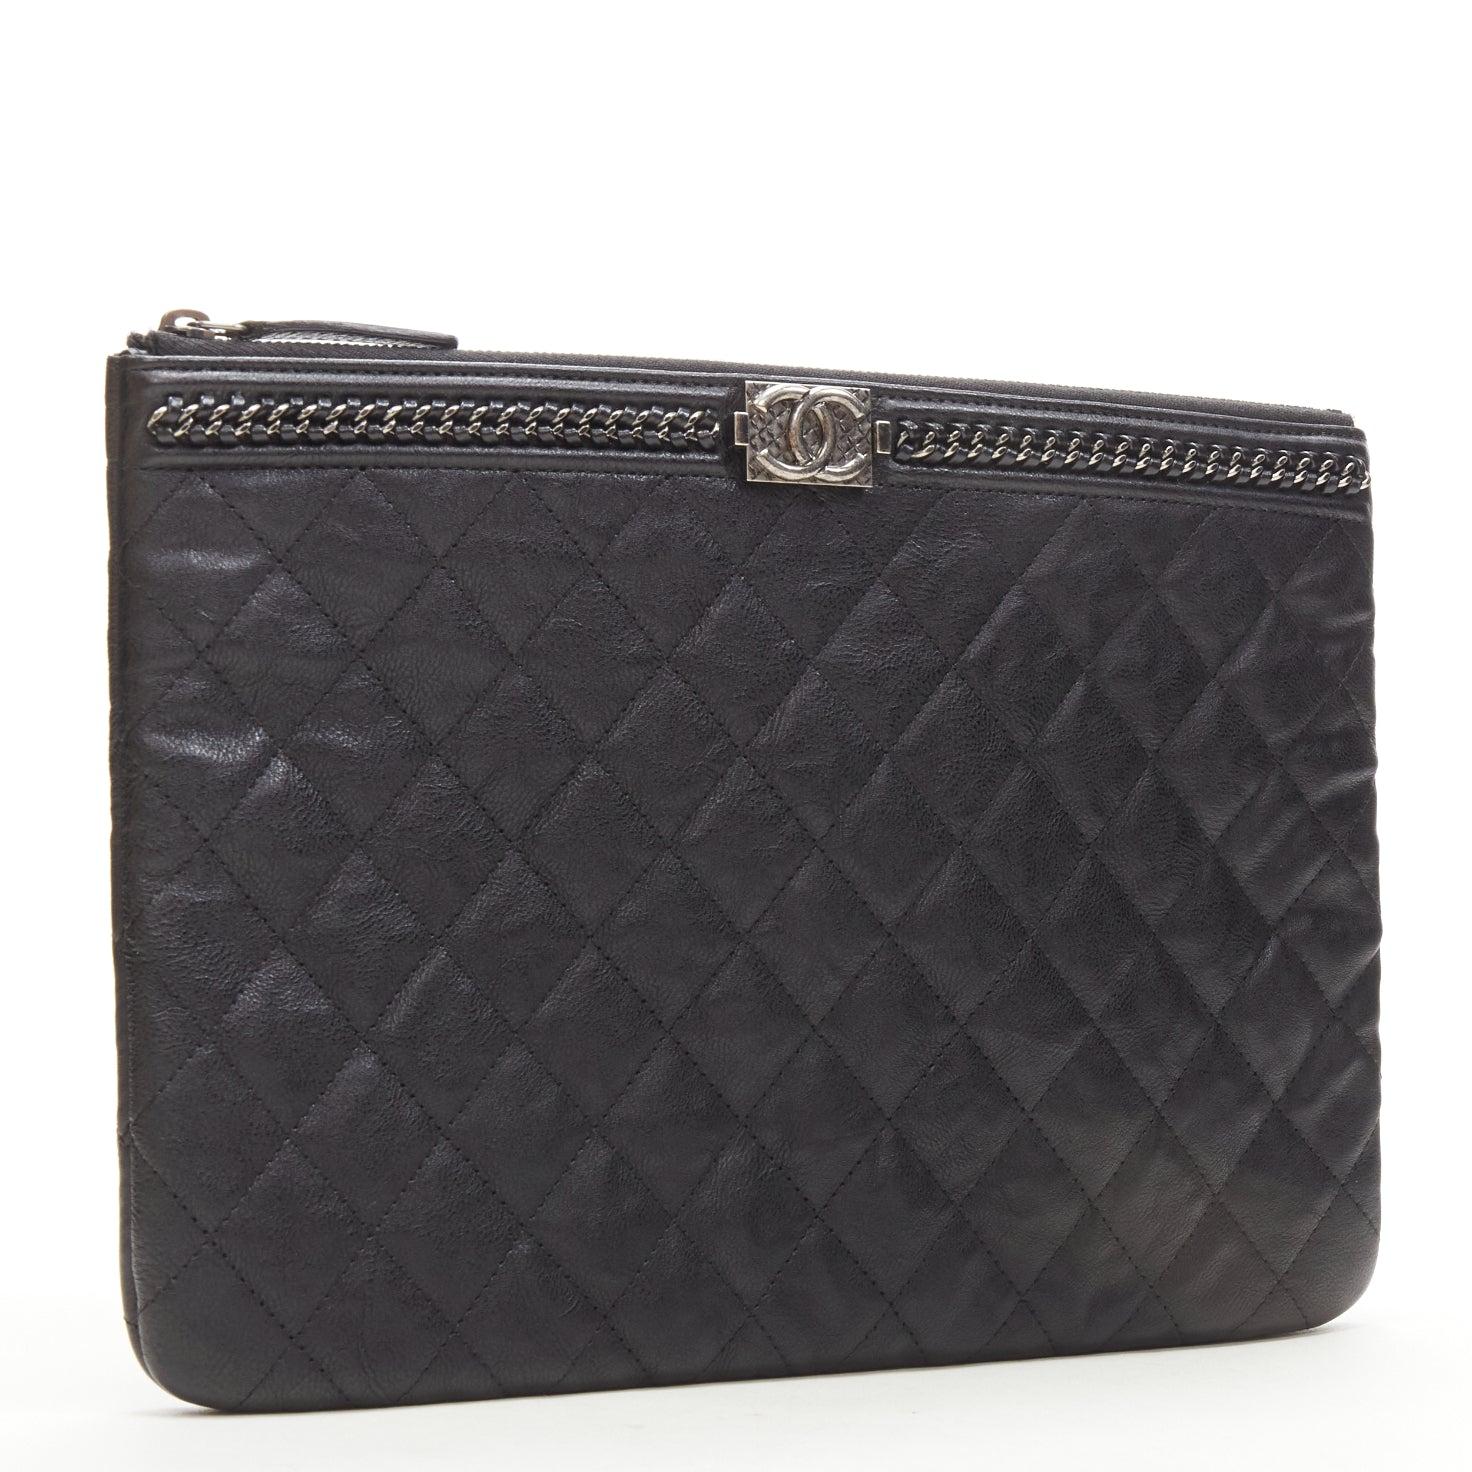 CHANEL Large Boy O Case black quilted leather chain trim flat pouch clutch bag
Reference: TGAS/C01209
Brand: Chanel
Designer: Karl Lagerfeld
Model: O Case
Material: Leather
Color: Black, Silver
Pattern: Solid
Closure: Zip
Lining: Nylon
Extra